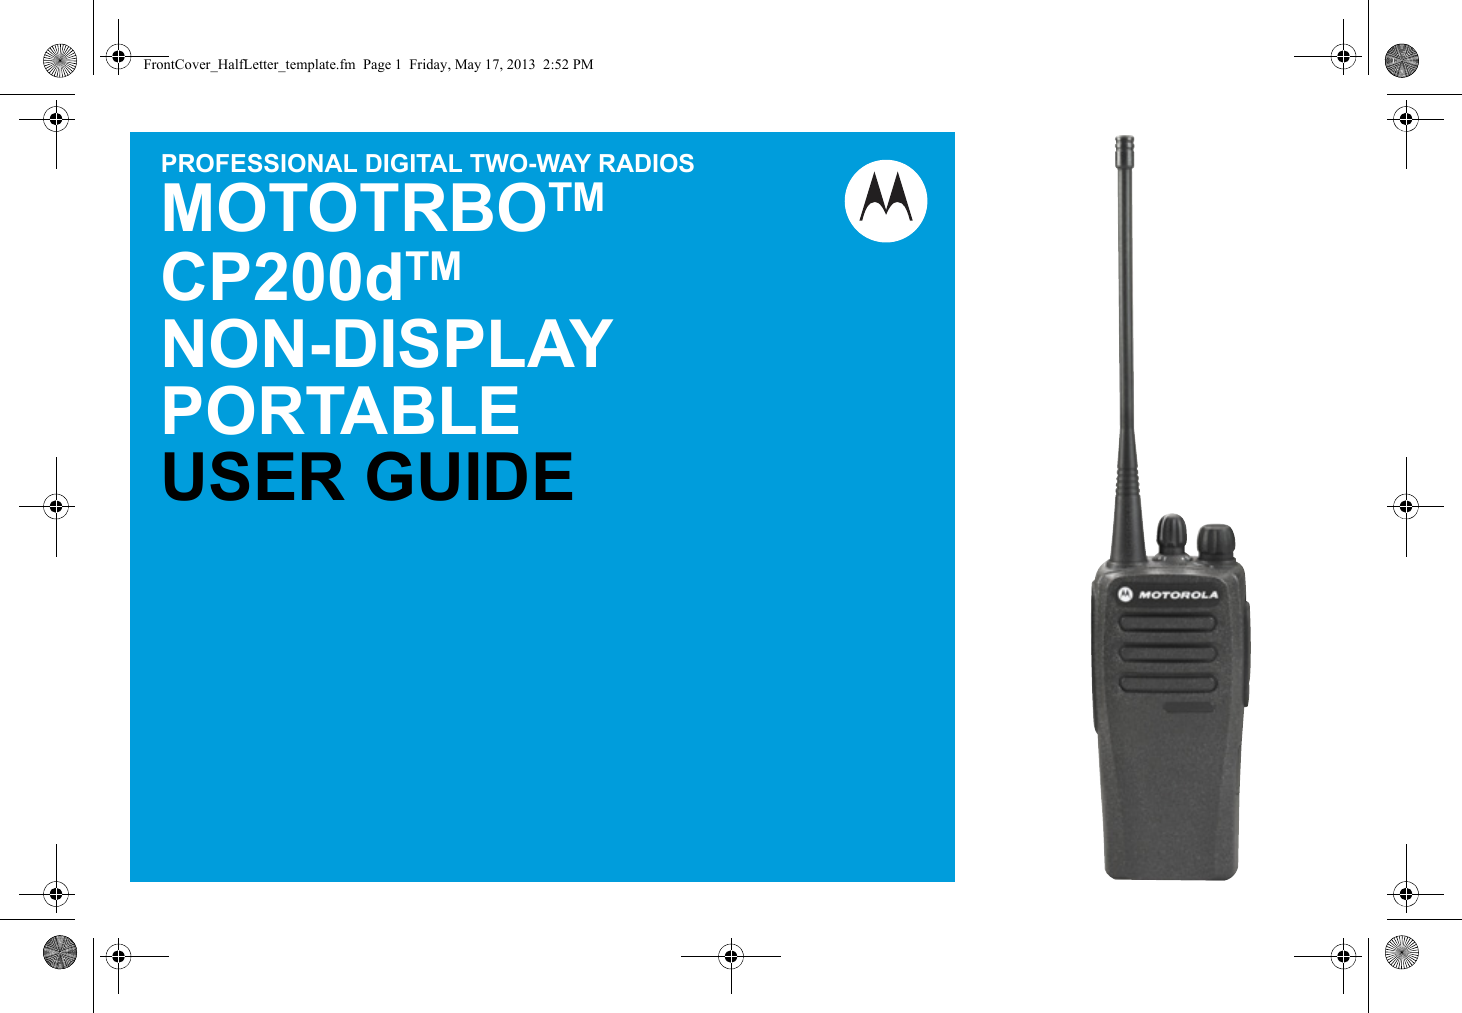 PROFESSIONAL DIGITAL TWO-WAY RADIOSMOTOTRBOTMCP200dTMNON-DISPLAYPORTABLEUSER GUIDEFrontCover_HalfLetter_template.fm  Page 1  Friday, May 17, 2013  2:52 PM